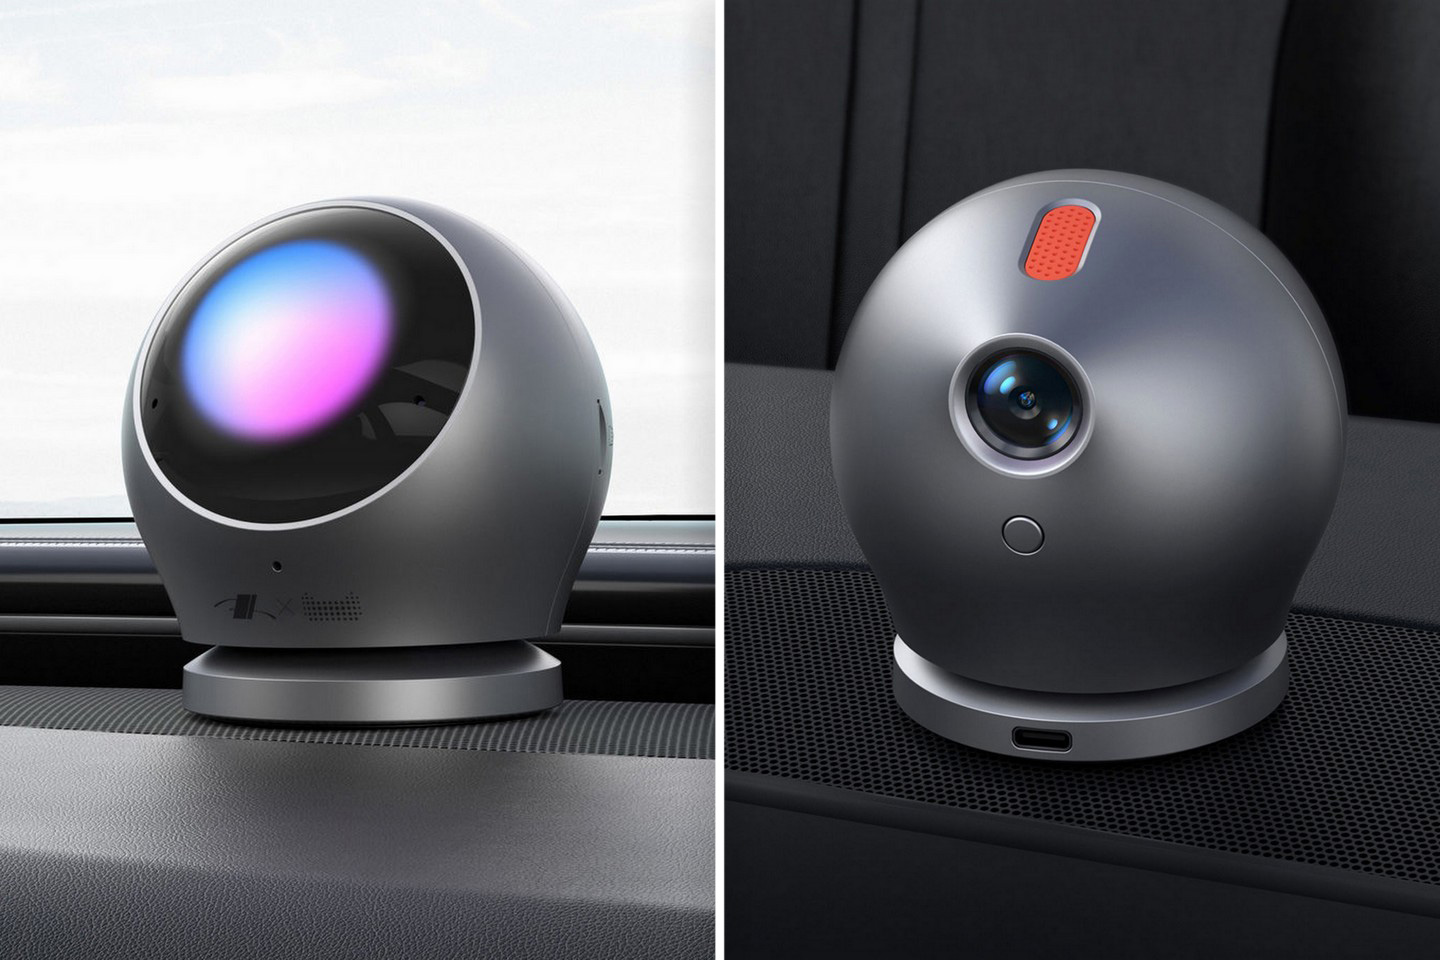 #The Tmall Genie dashcam puts an Apple HomePod Mini-inspired smart camera in your car